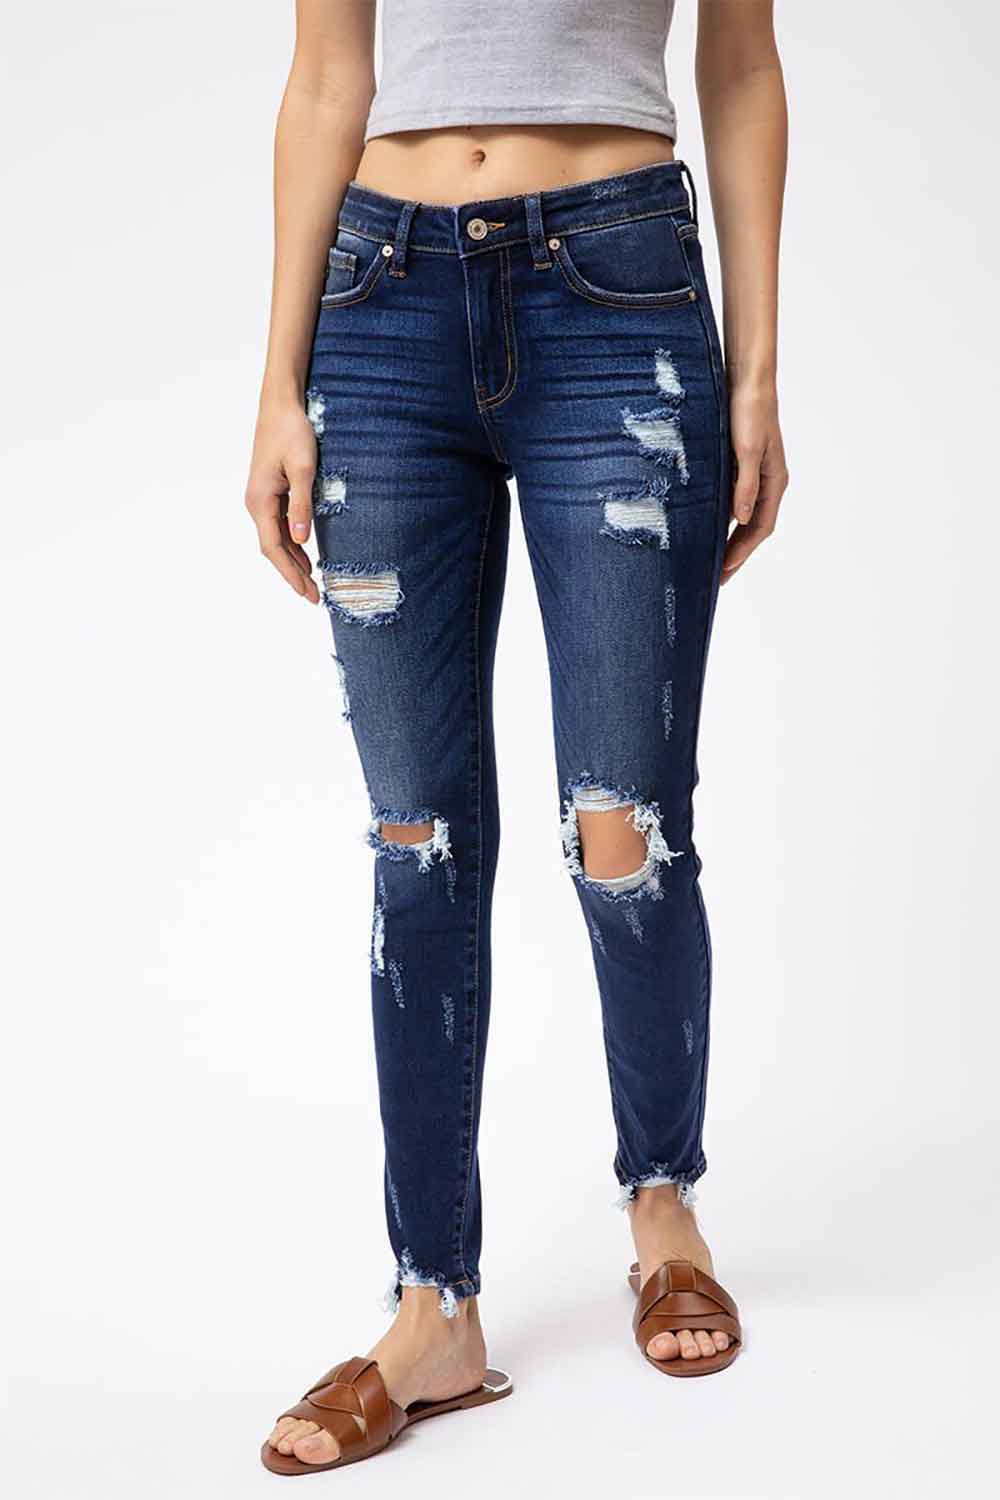 KanCan Jeans Mid Rise Distressed Skinny Jeans for Women in Dark Wash ...